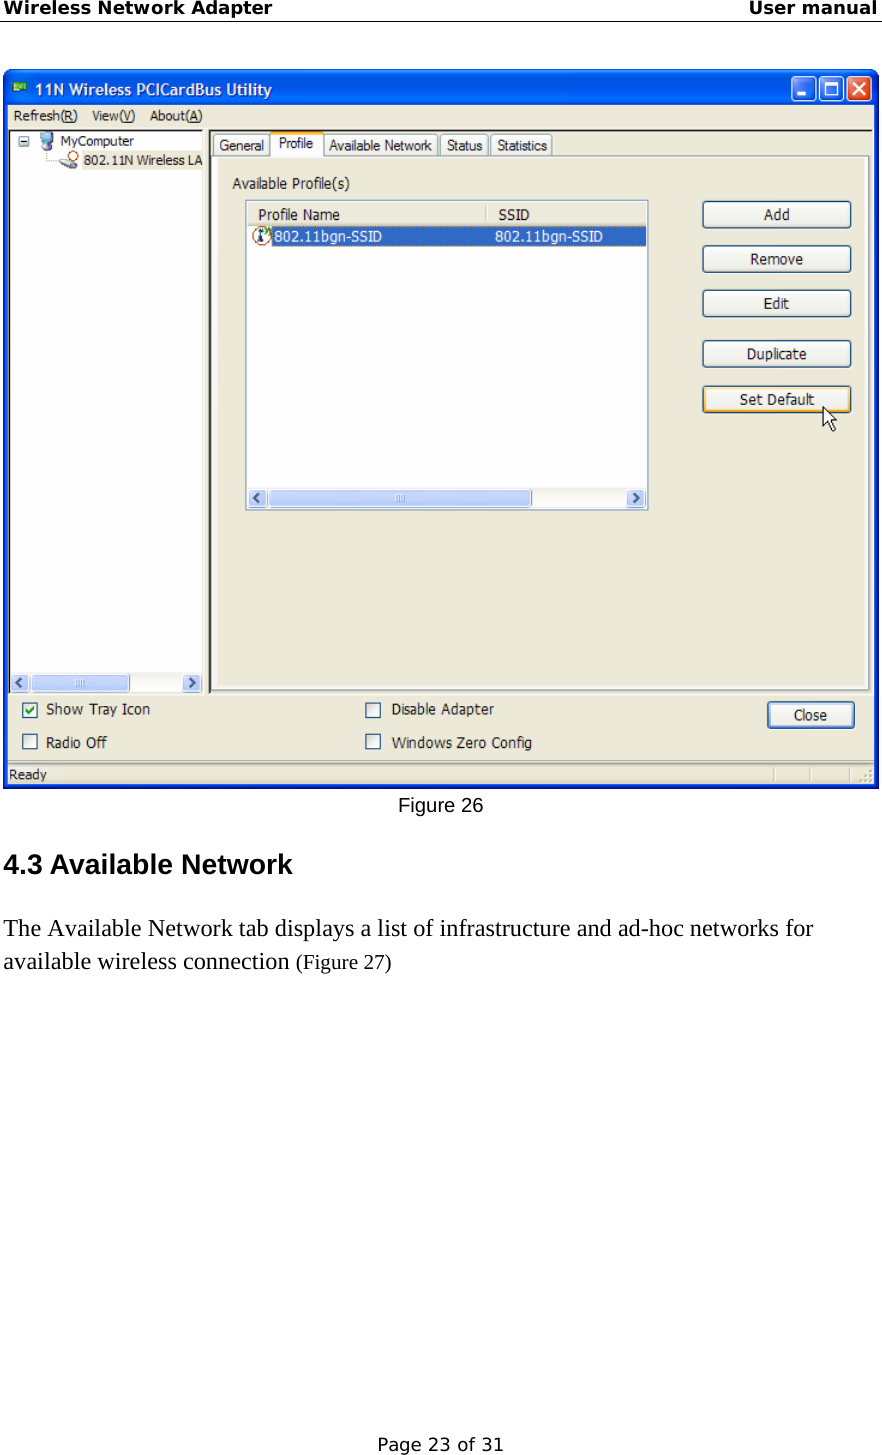 Wireless Network Adapter                                                    User manual Page 23 of 31  Figure 26 4.3 Available Network The Available Network tab displays a list of infrastructure and ad-hoc networks for available wireless connection (Figure 27) 